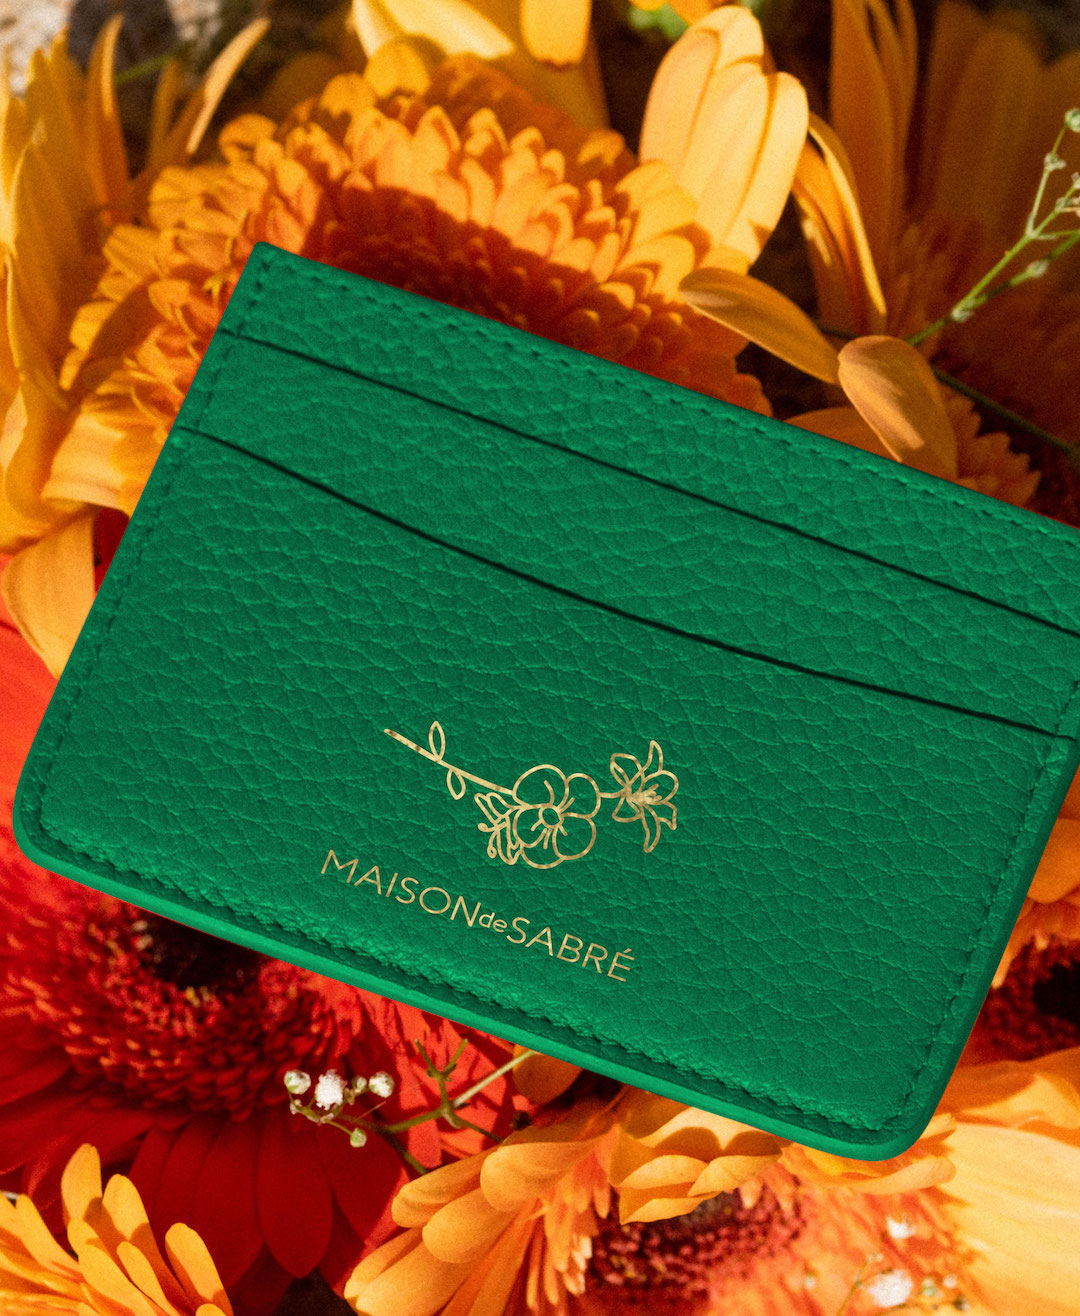 An emerald green cardholder lays on a bed of flowers. 